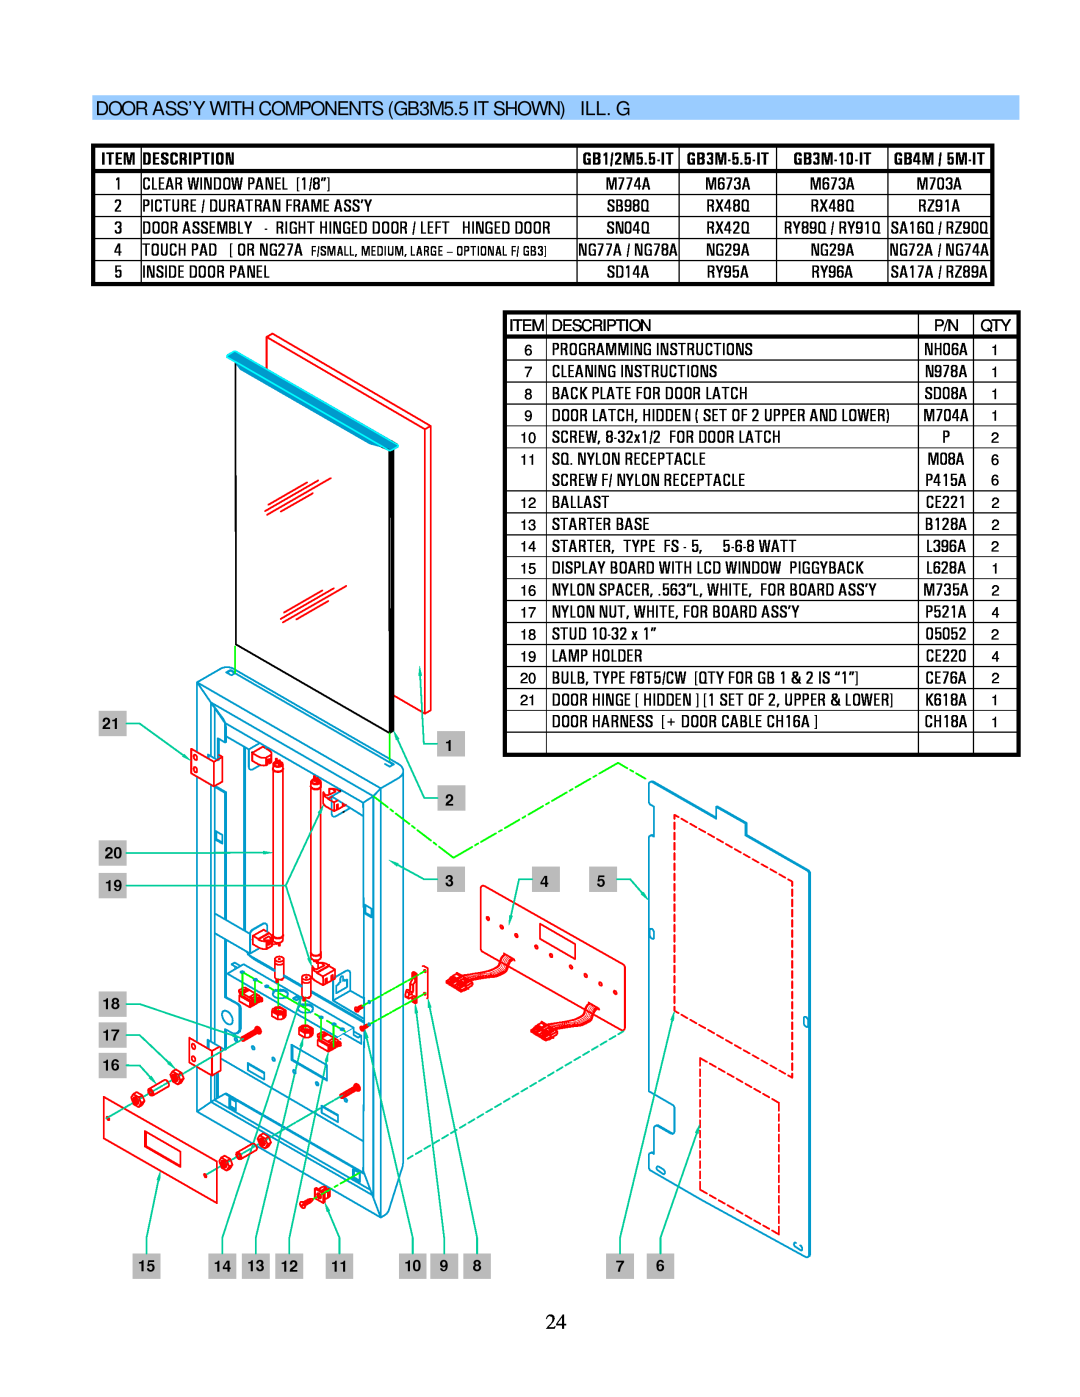 Cecilware GB-IT operation manual Ill. G, DOOR ASS’Y WITH COMPONENTS GB3M5.5 IT SHOWN, Description, GB3M-10-IT 